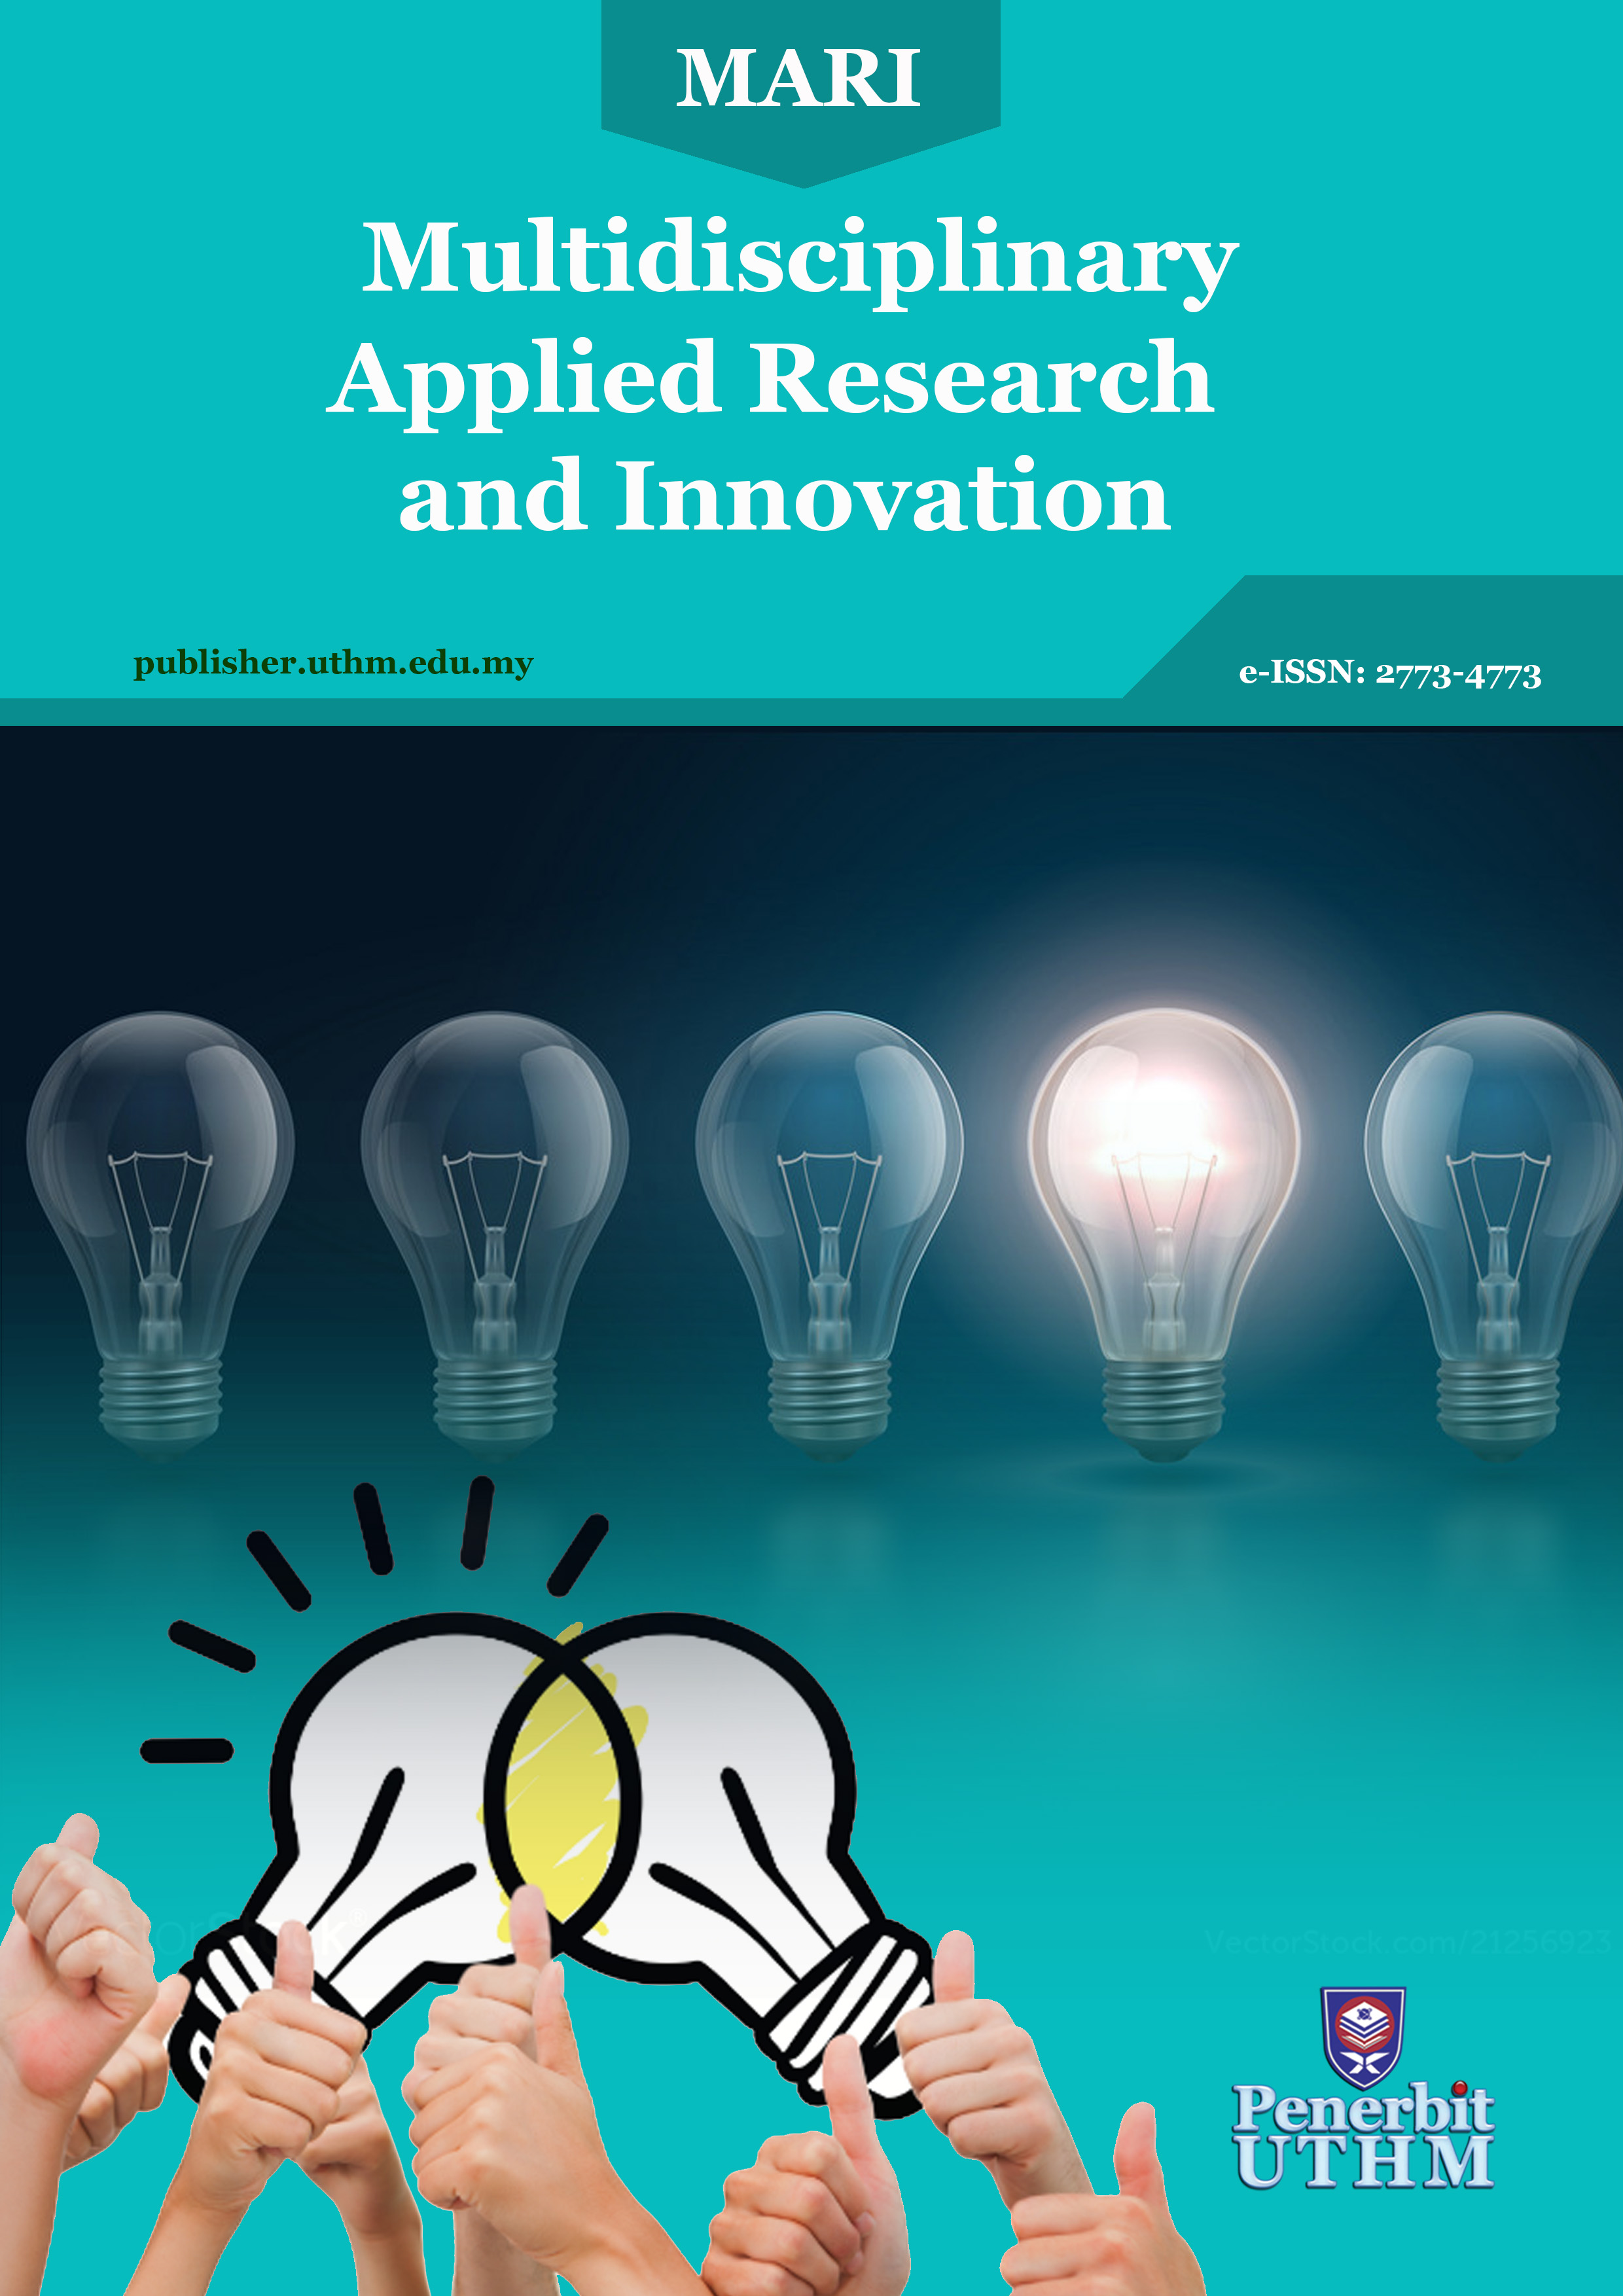 Multidisciplinary Applied Research and Innovation 2020